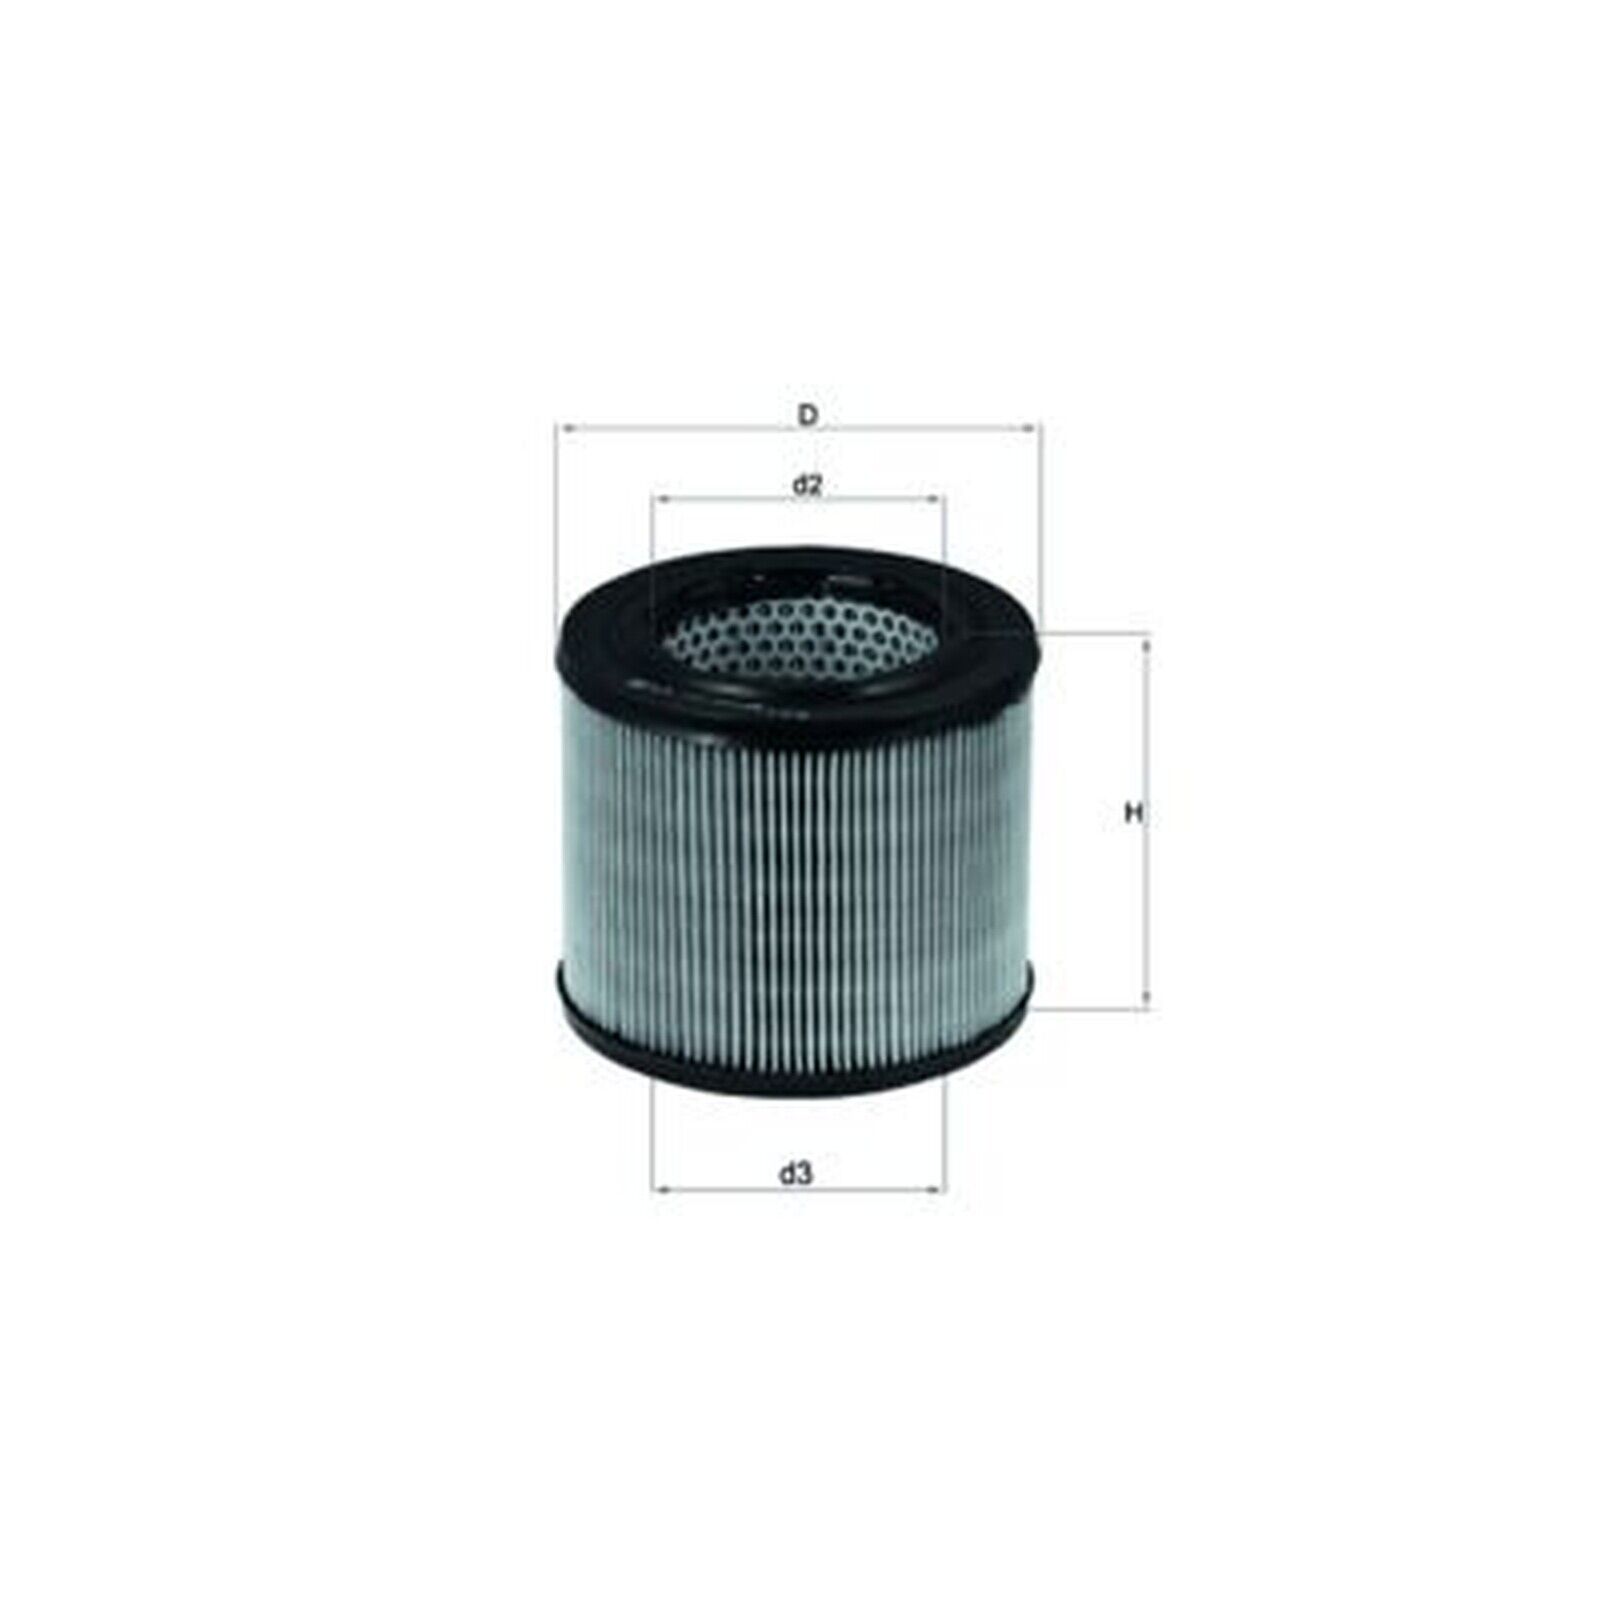 Mahle Air Filter LX 194 LX194 fits BMW Motorcycles - OE Matching Fit & Quality